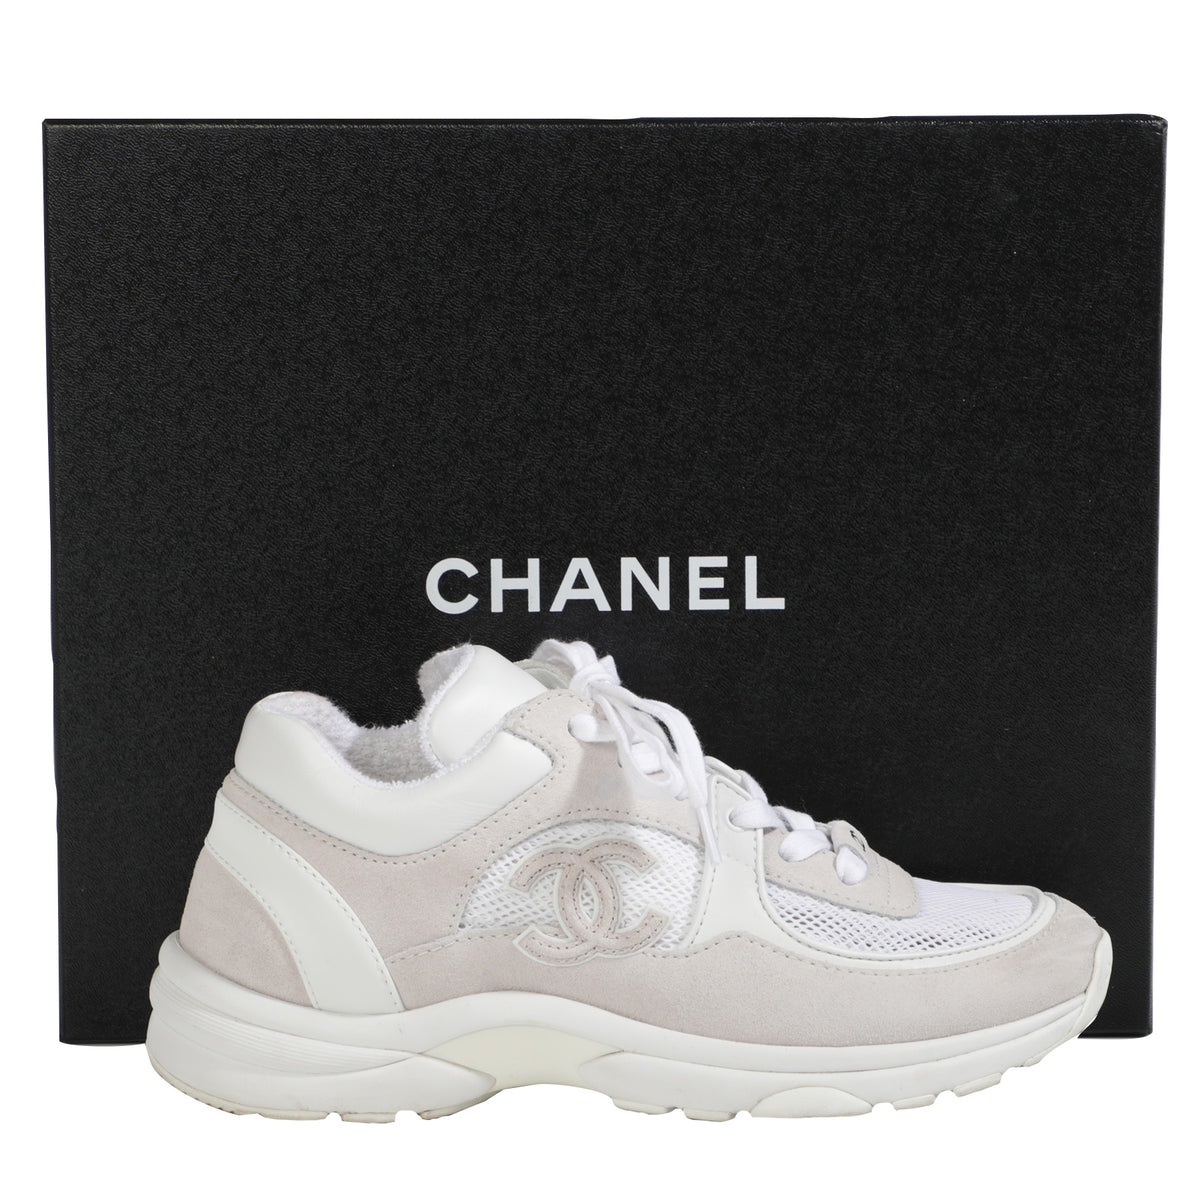 Chanel Spring/Summer 2019 Cloud White Suede Leather Trainer Sneakers Size 6.5